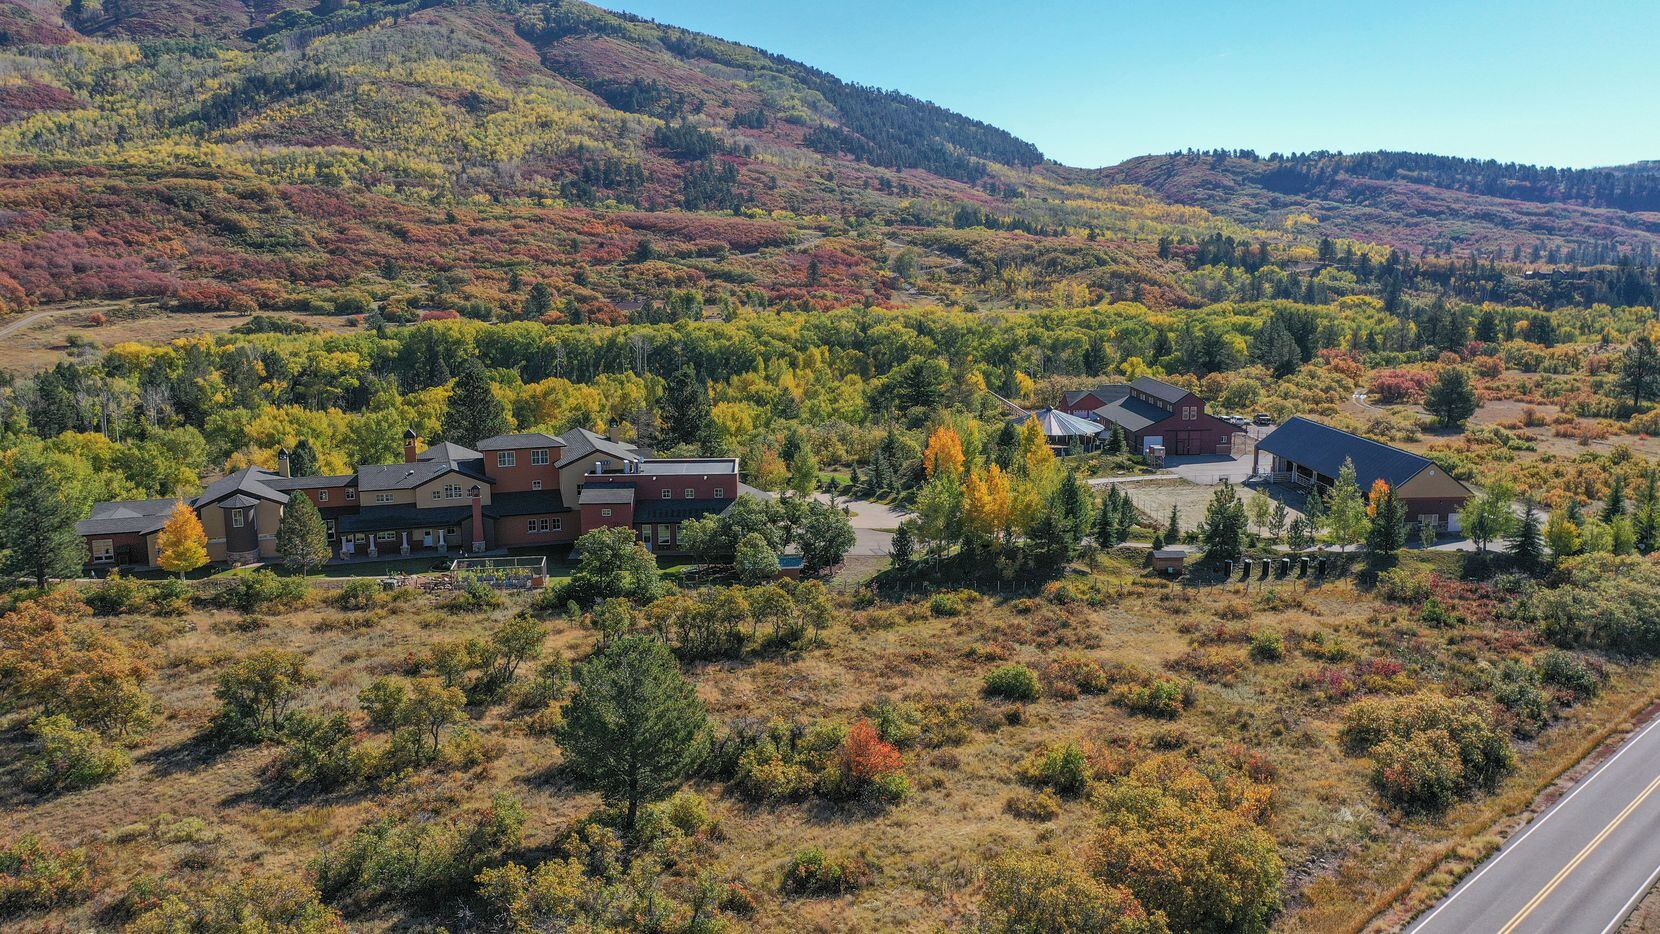 Take a look at the Wildflower Ranch at 3456 County Road 124 in Hesperus, CO.
default